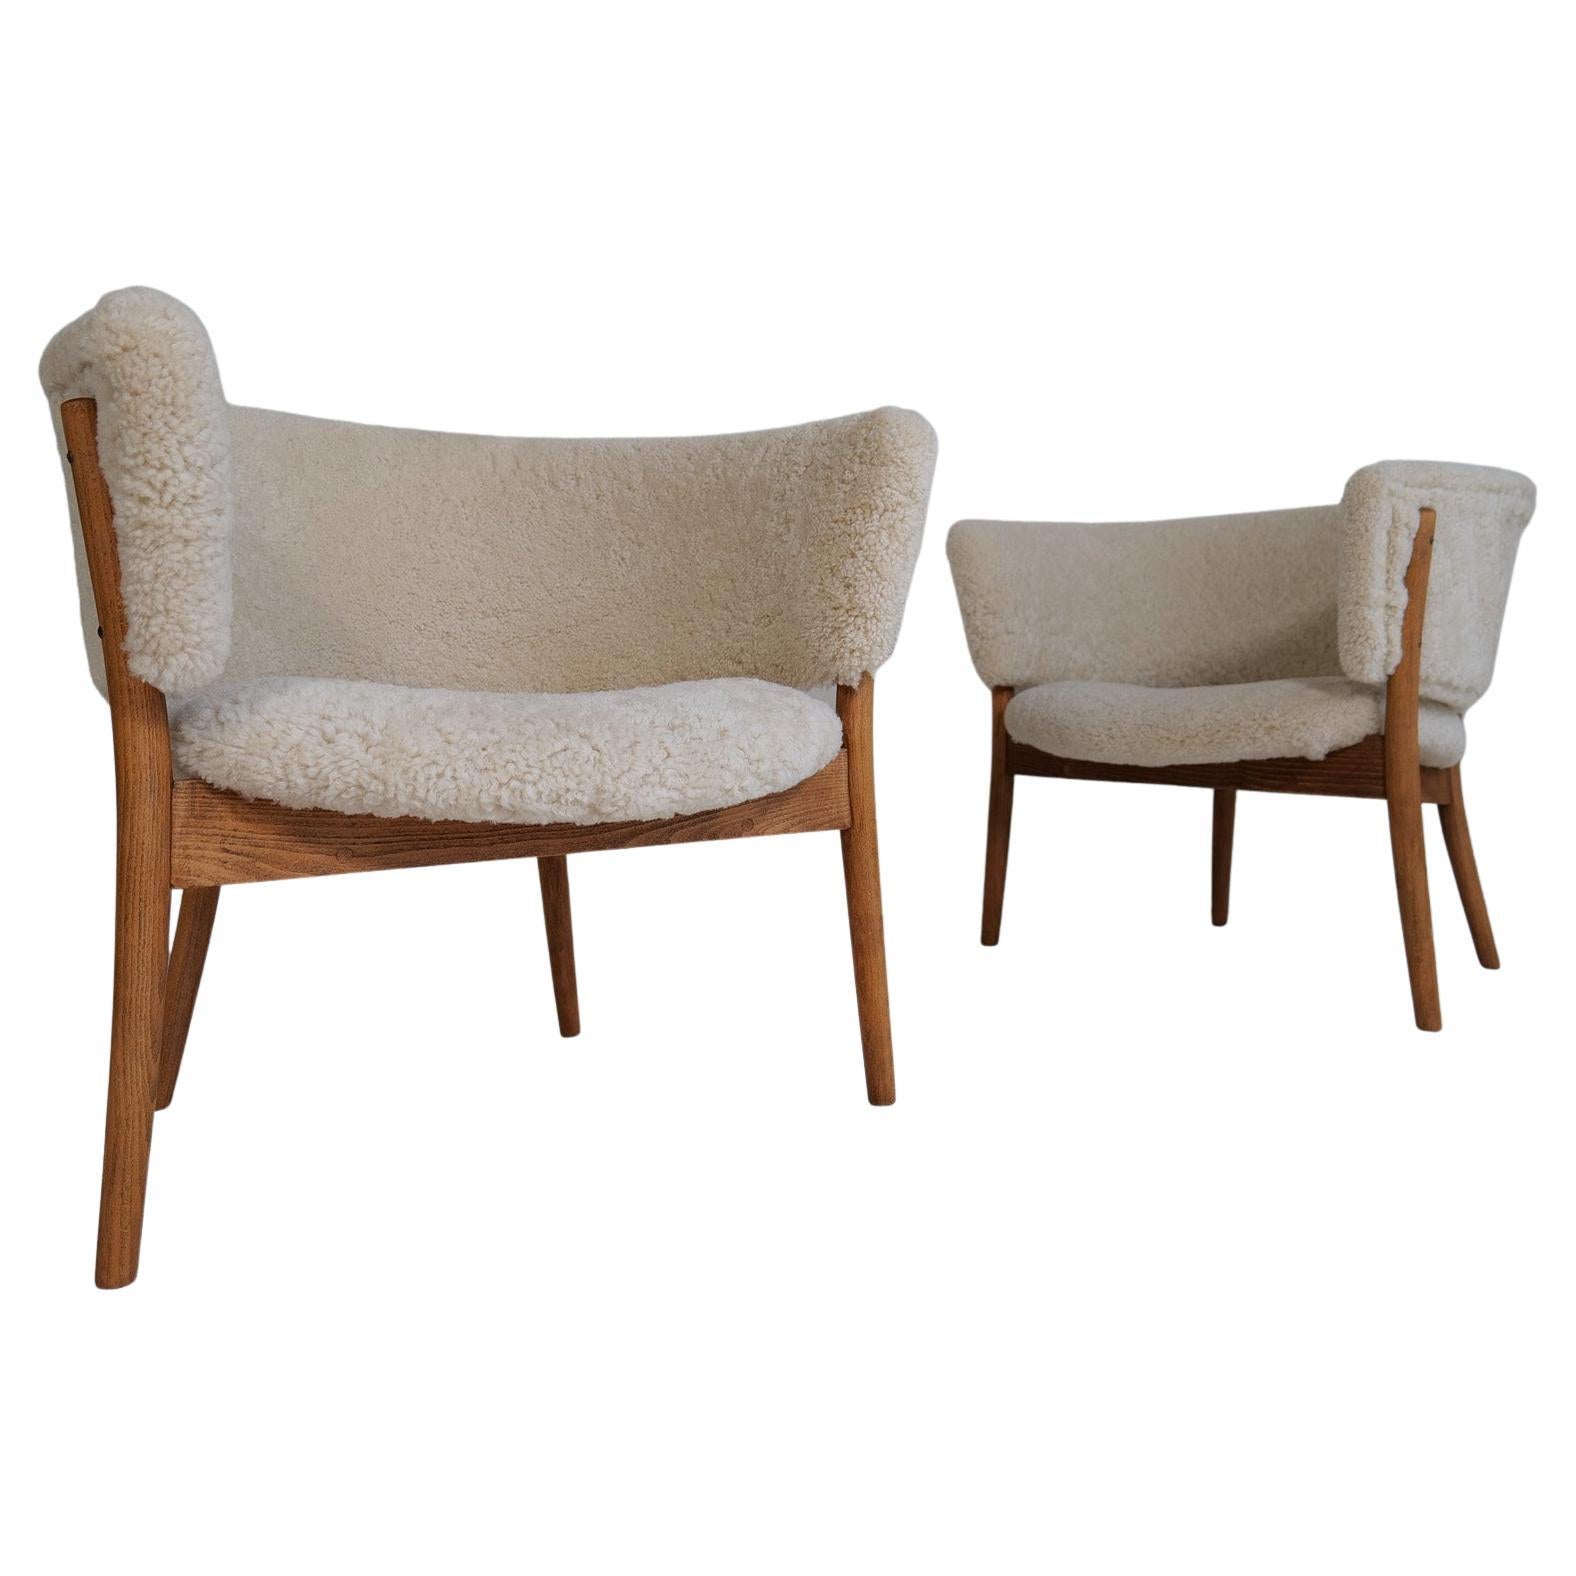 Mid-Century Lounge Charis in Sheepskin/Shearling and Stained Wood, Sweden, 1962 For Sale